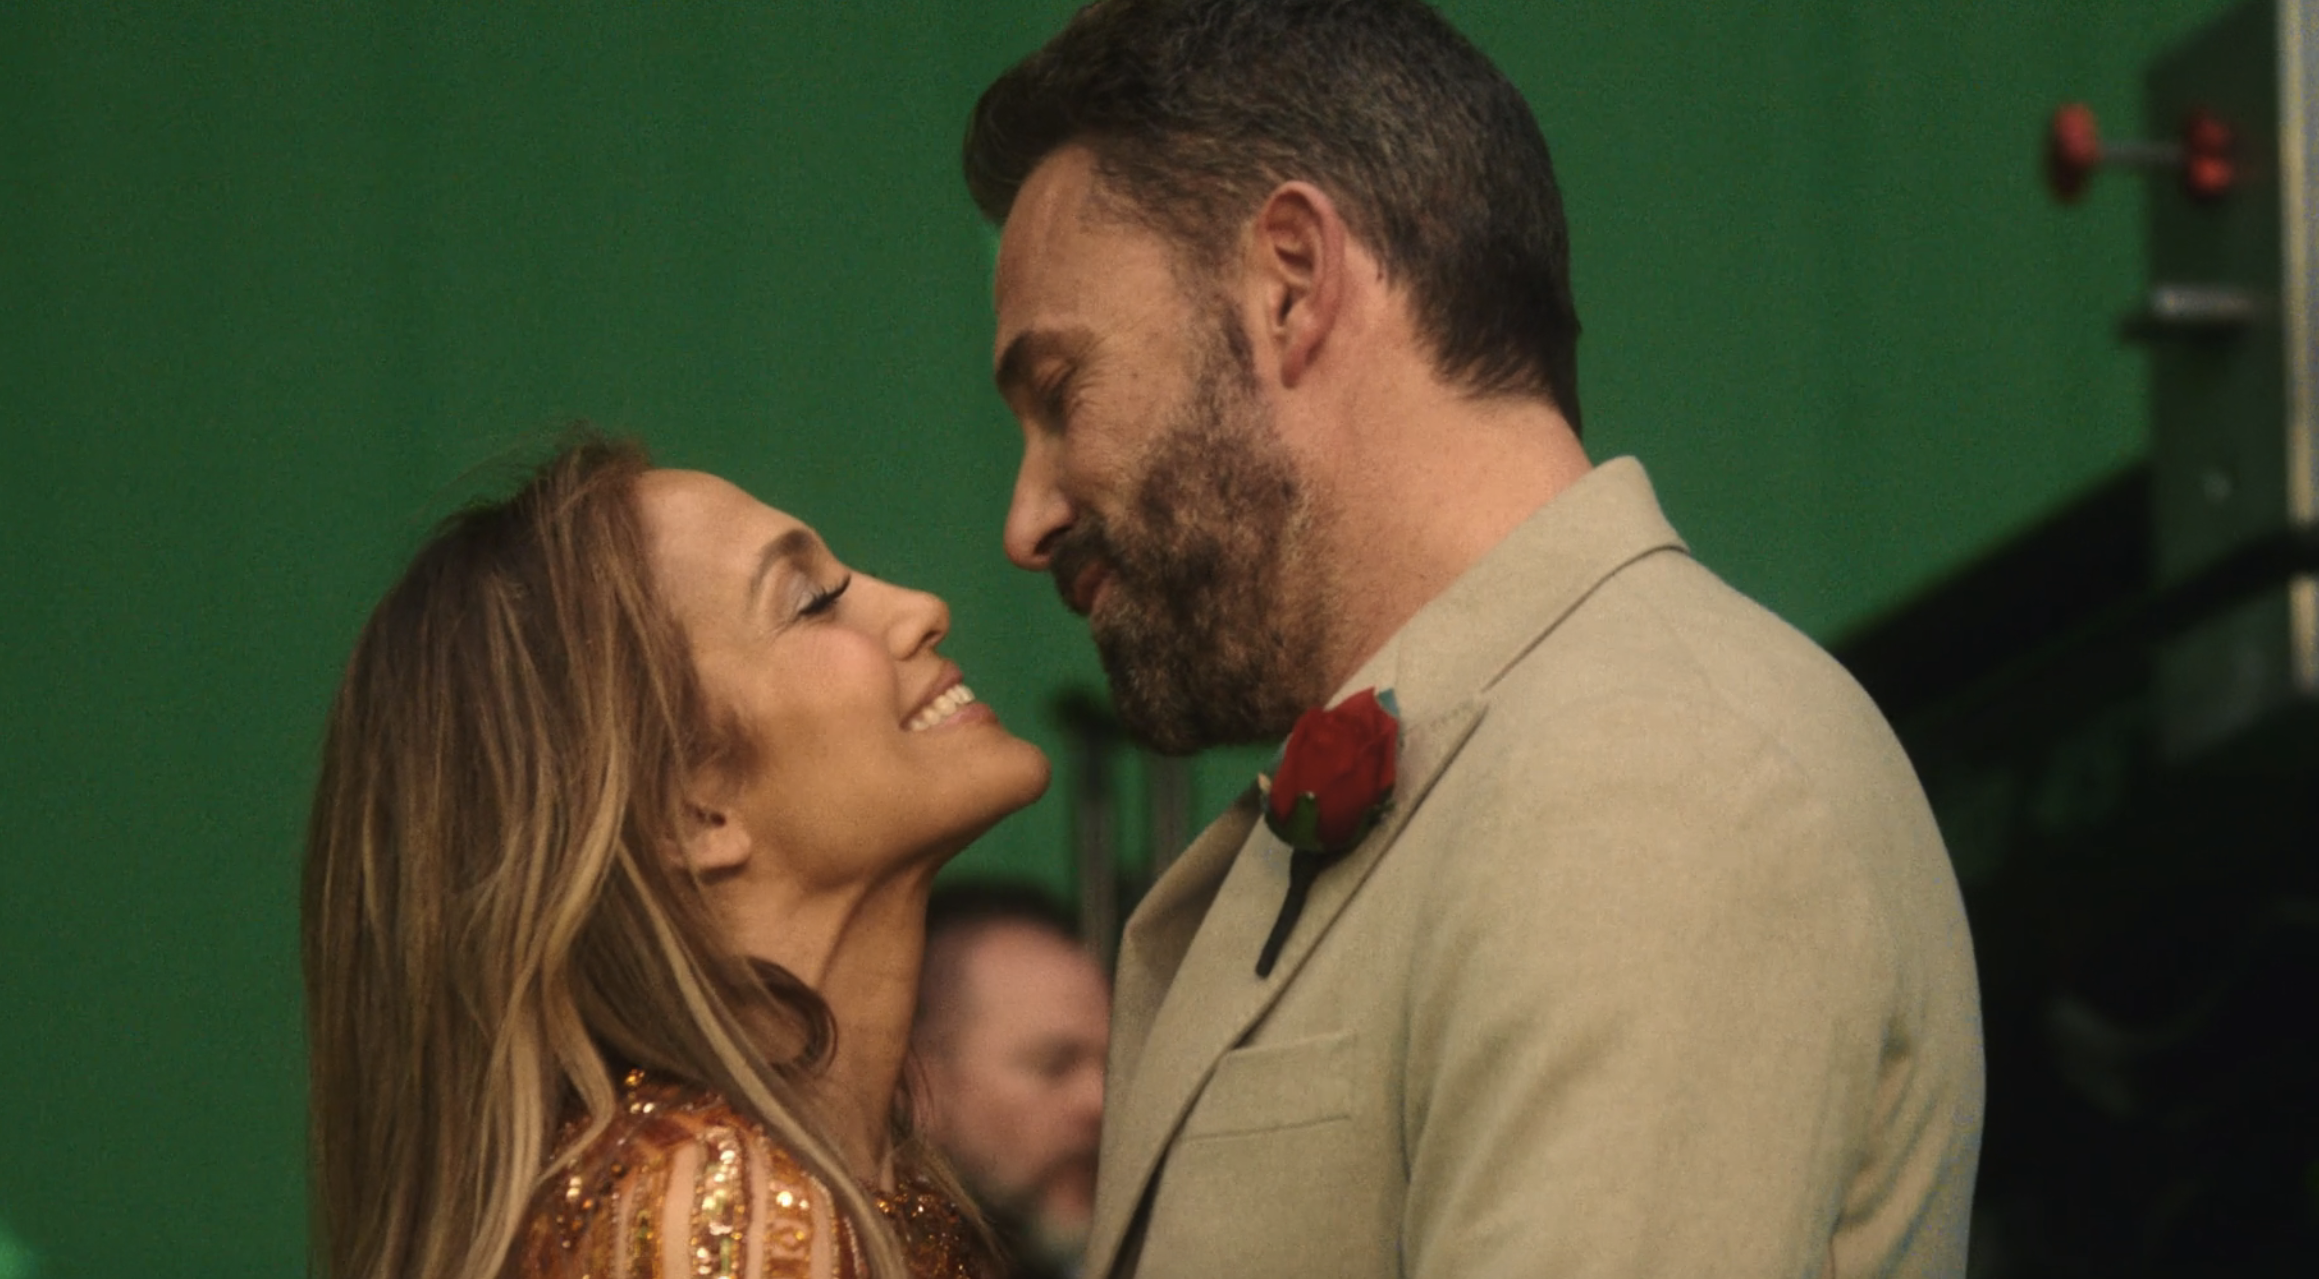 Jennifer Lopez and Ben Affleck share a smile, facing each other intimately. Lopez wears a sequined outfit, Affleck in a suit with a boutonniere